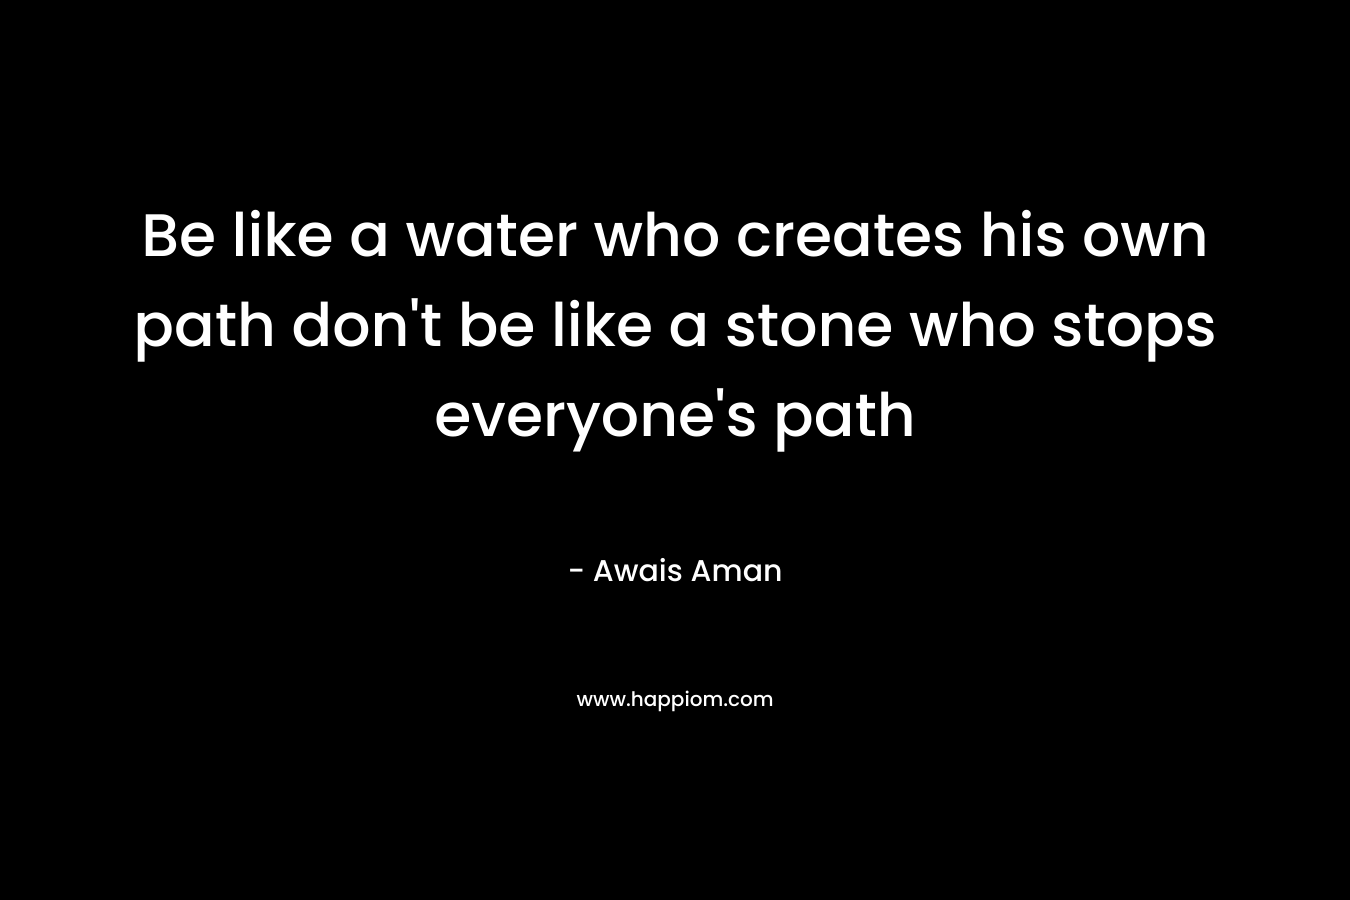 Be like a water who creates his own path don't be like a stone who stops everyone's path